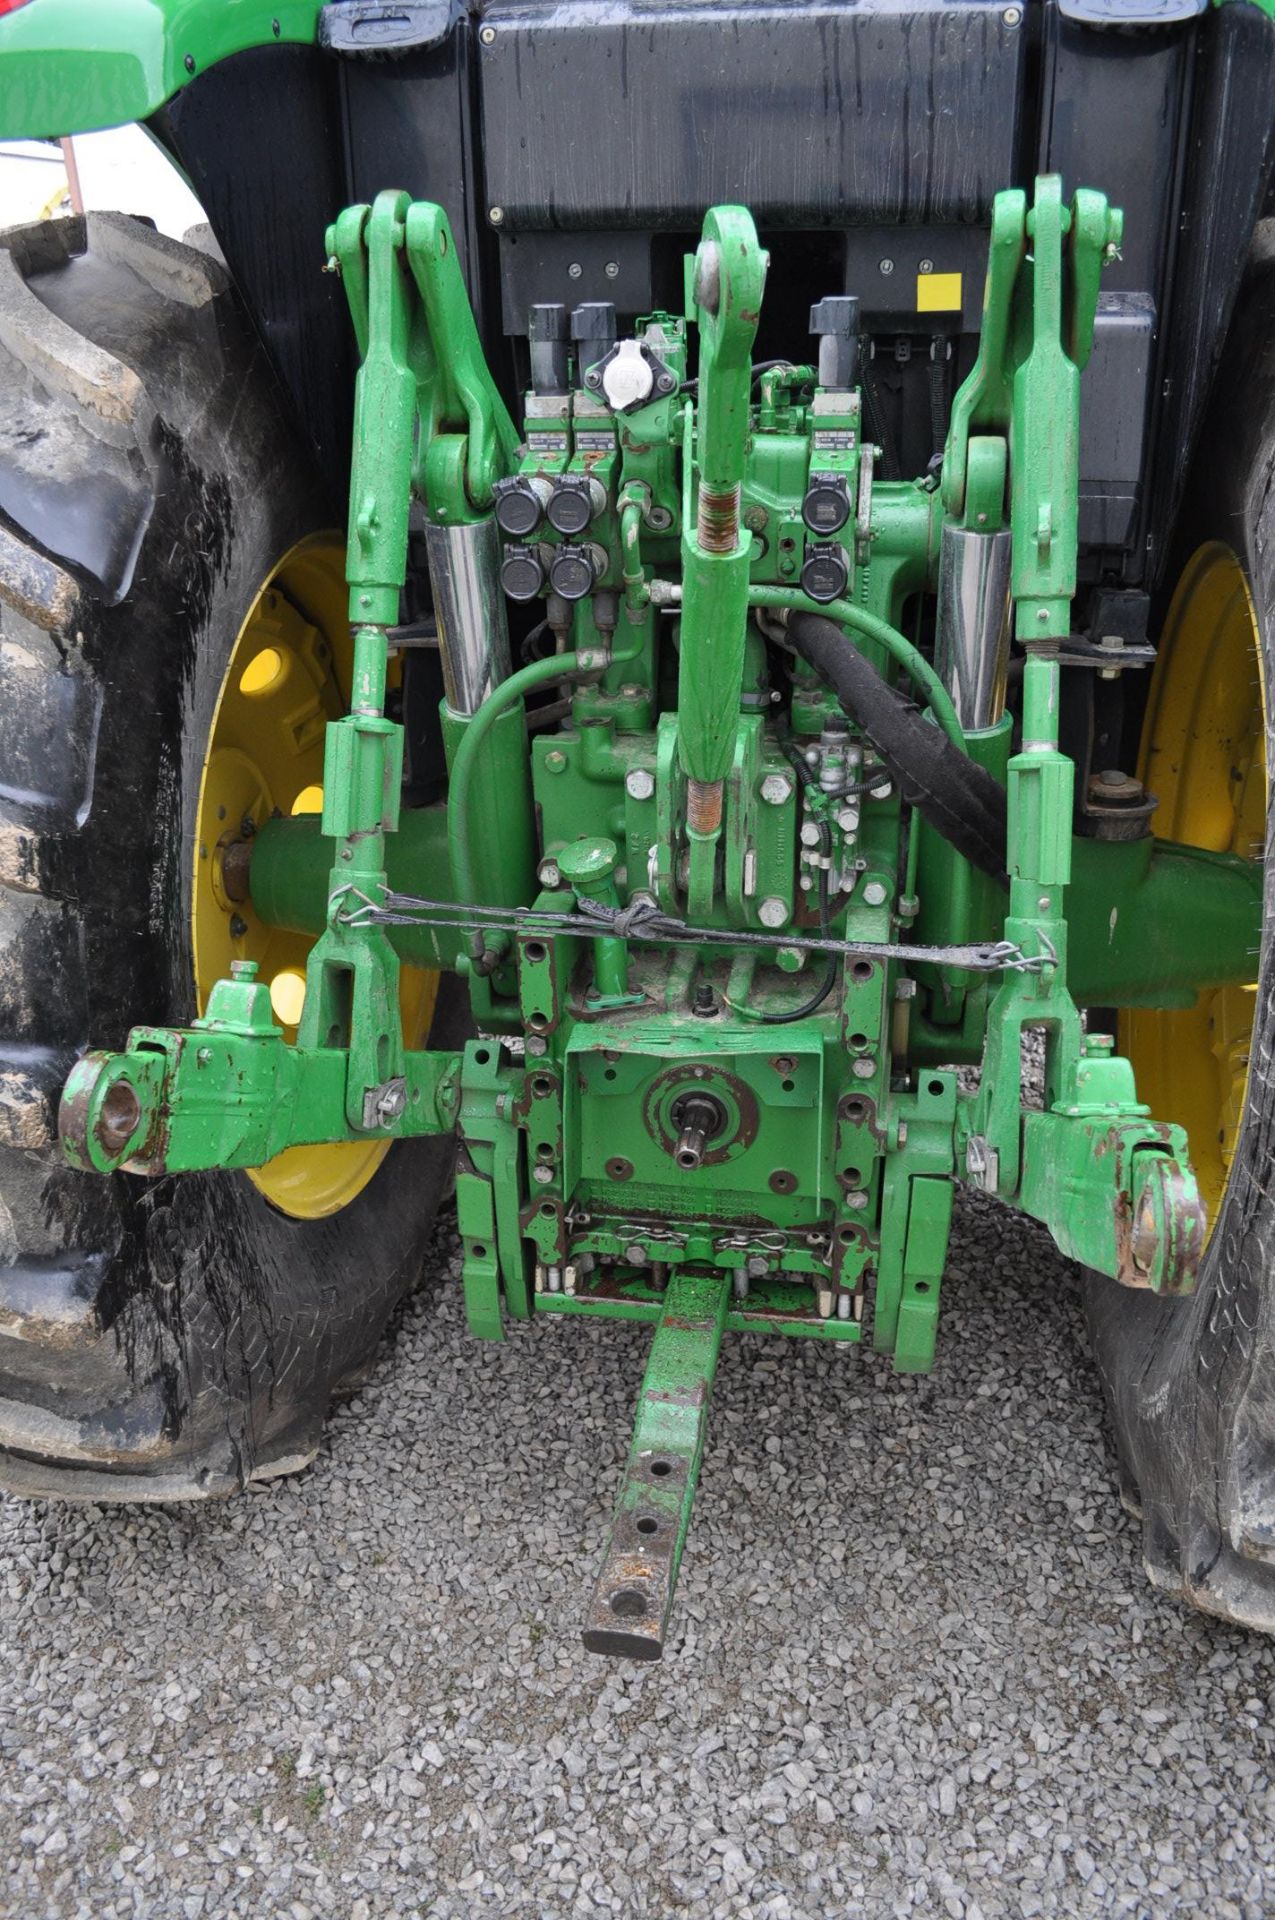 John Deere 6150M tractor, MFWD, C/H/A, 620/85 R 38 rear, 420/85 R 28 front, front fenders, - Image 13 of 20